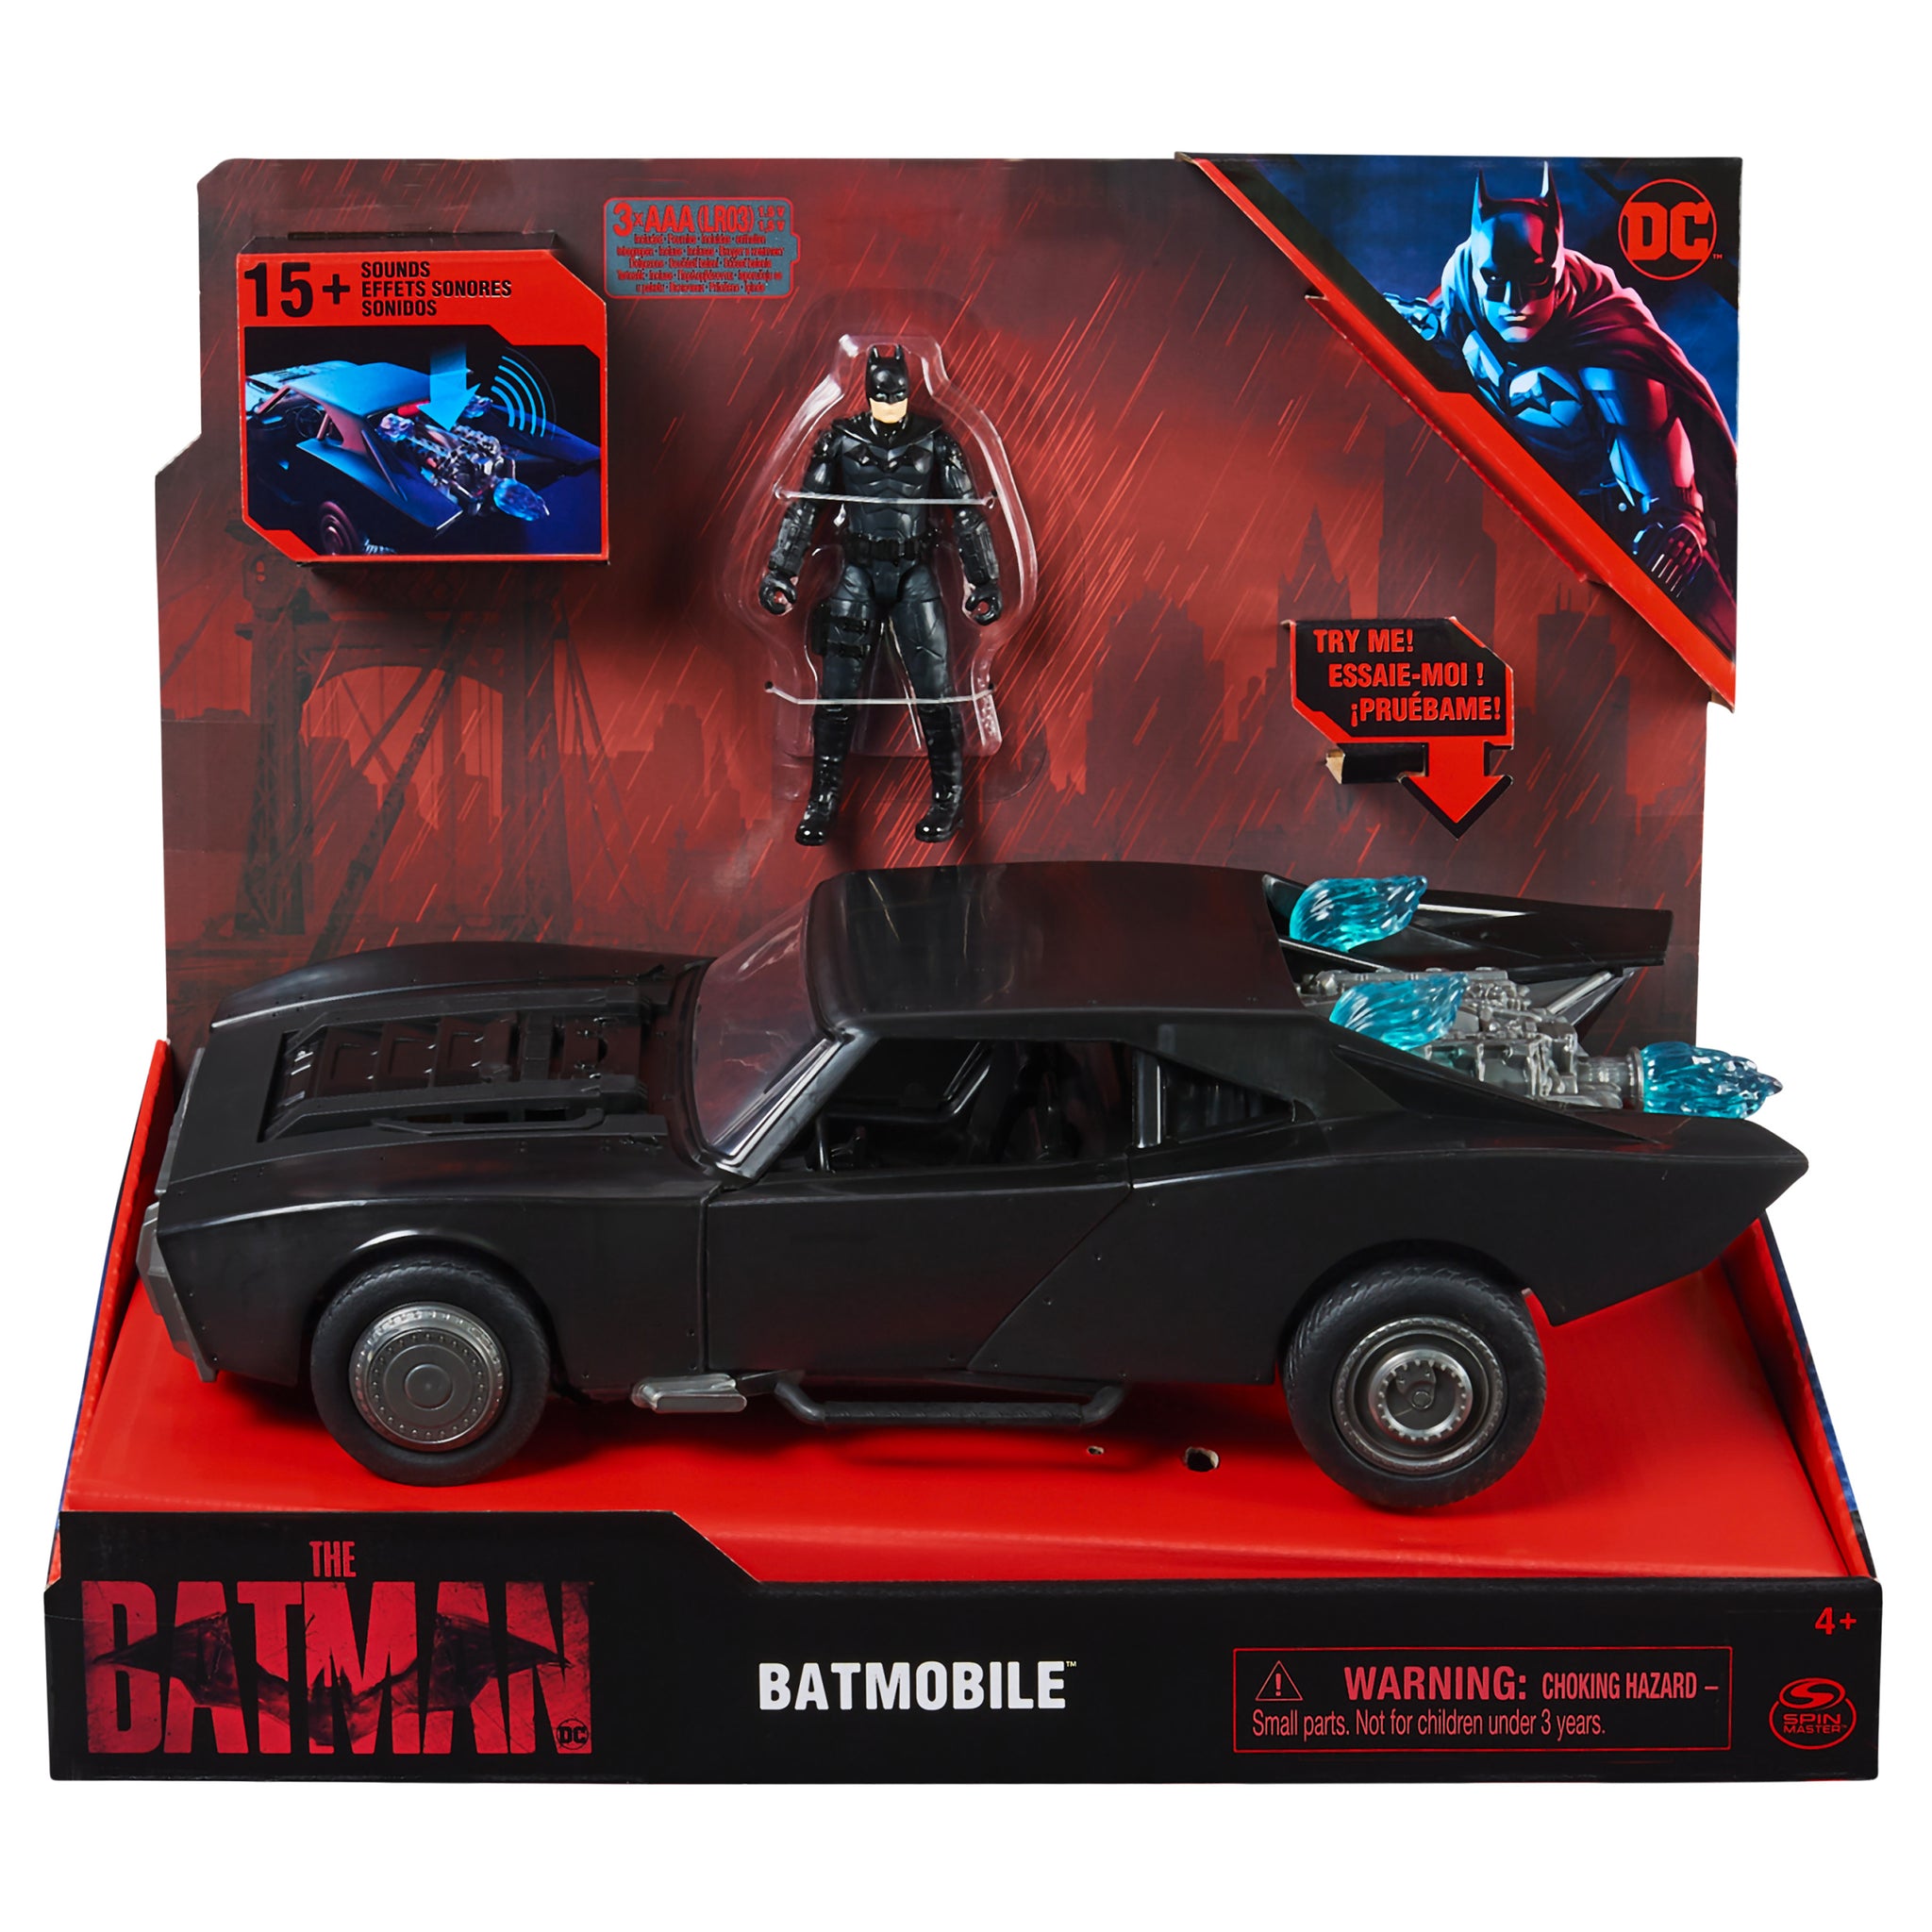 New Batmobile 1:18 scale model shows off more details of the car